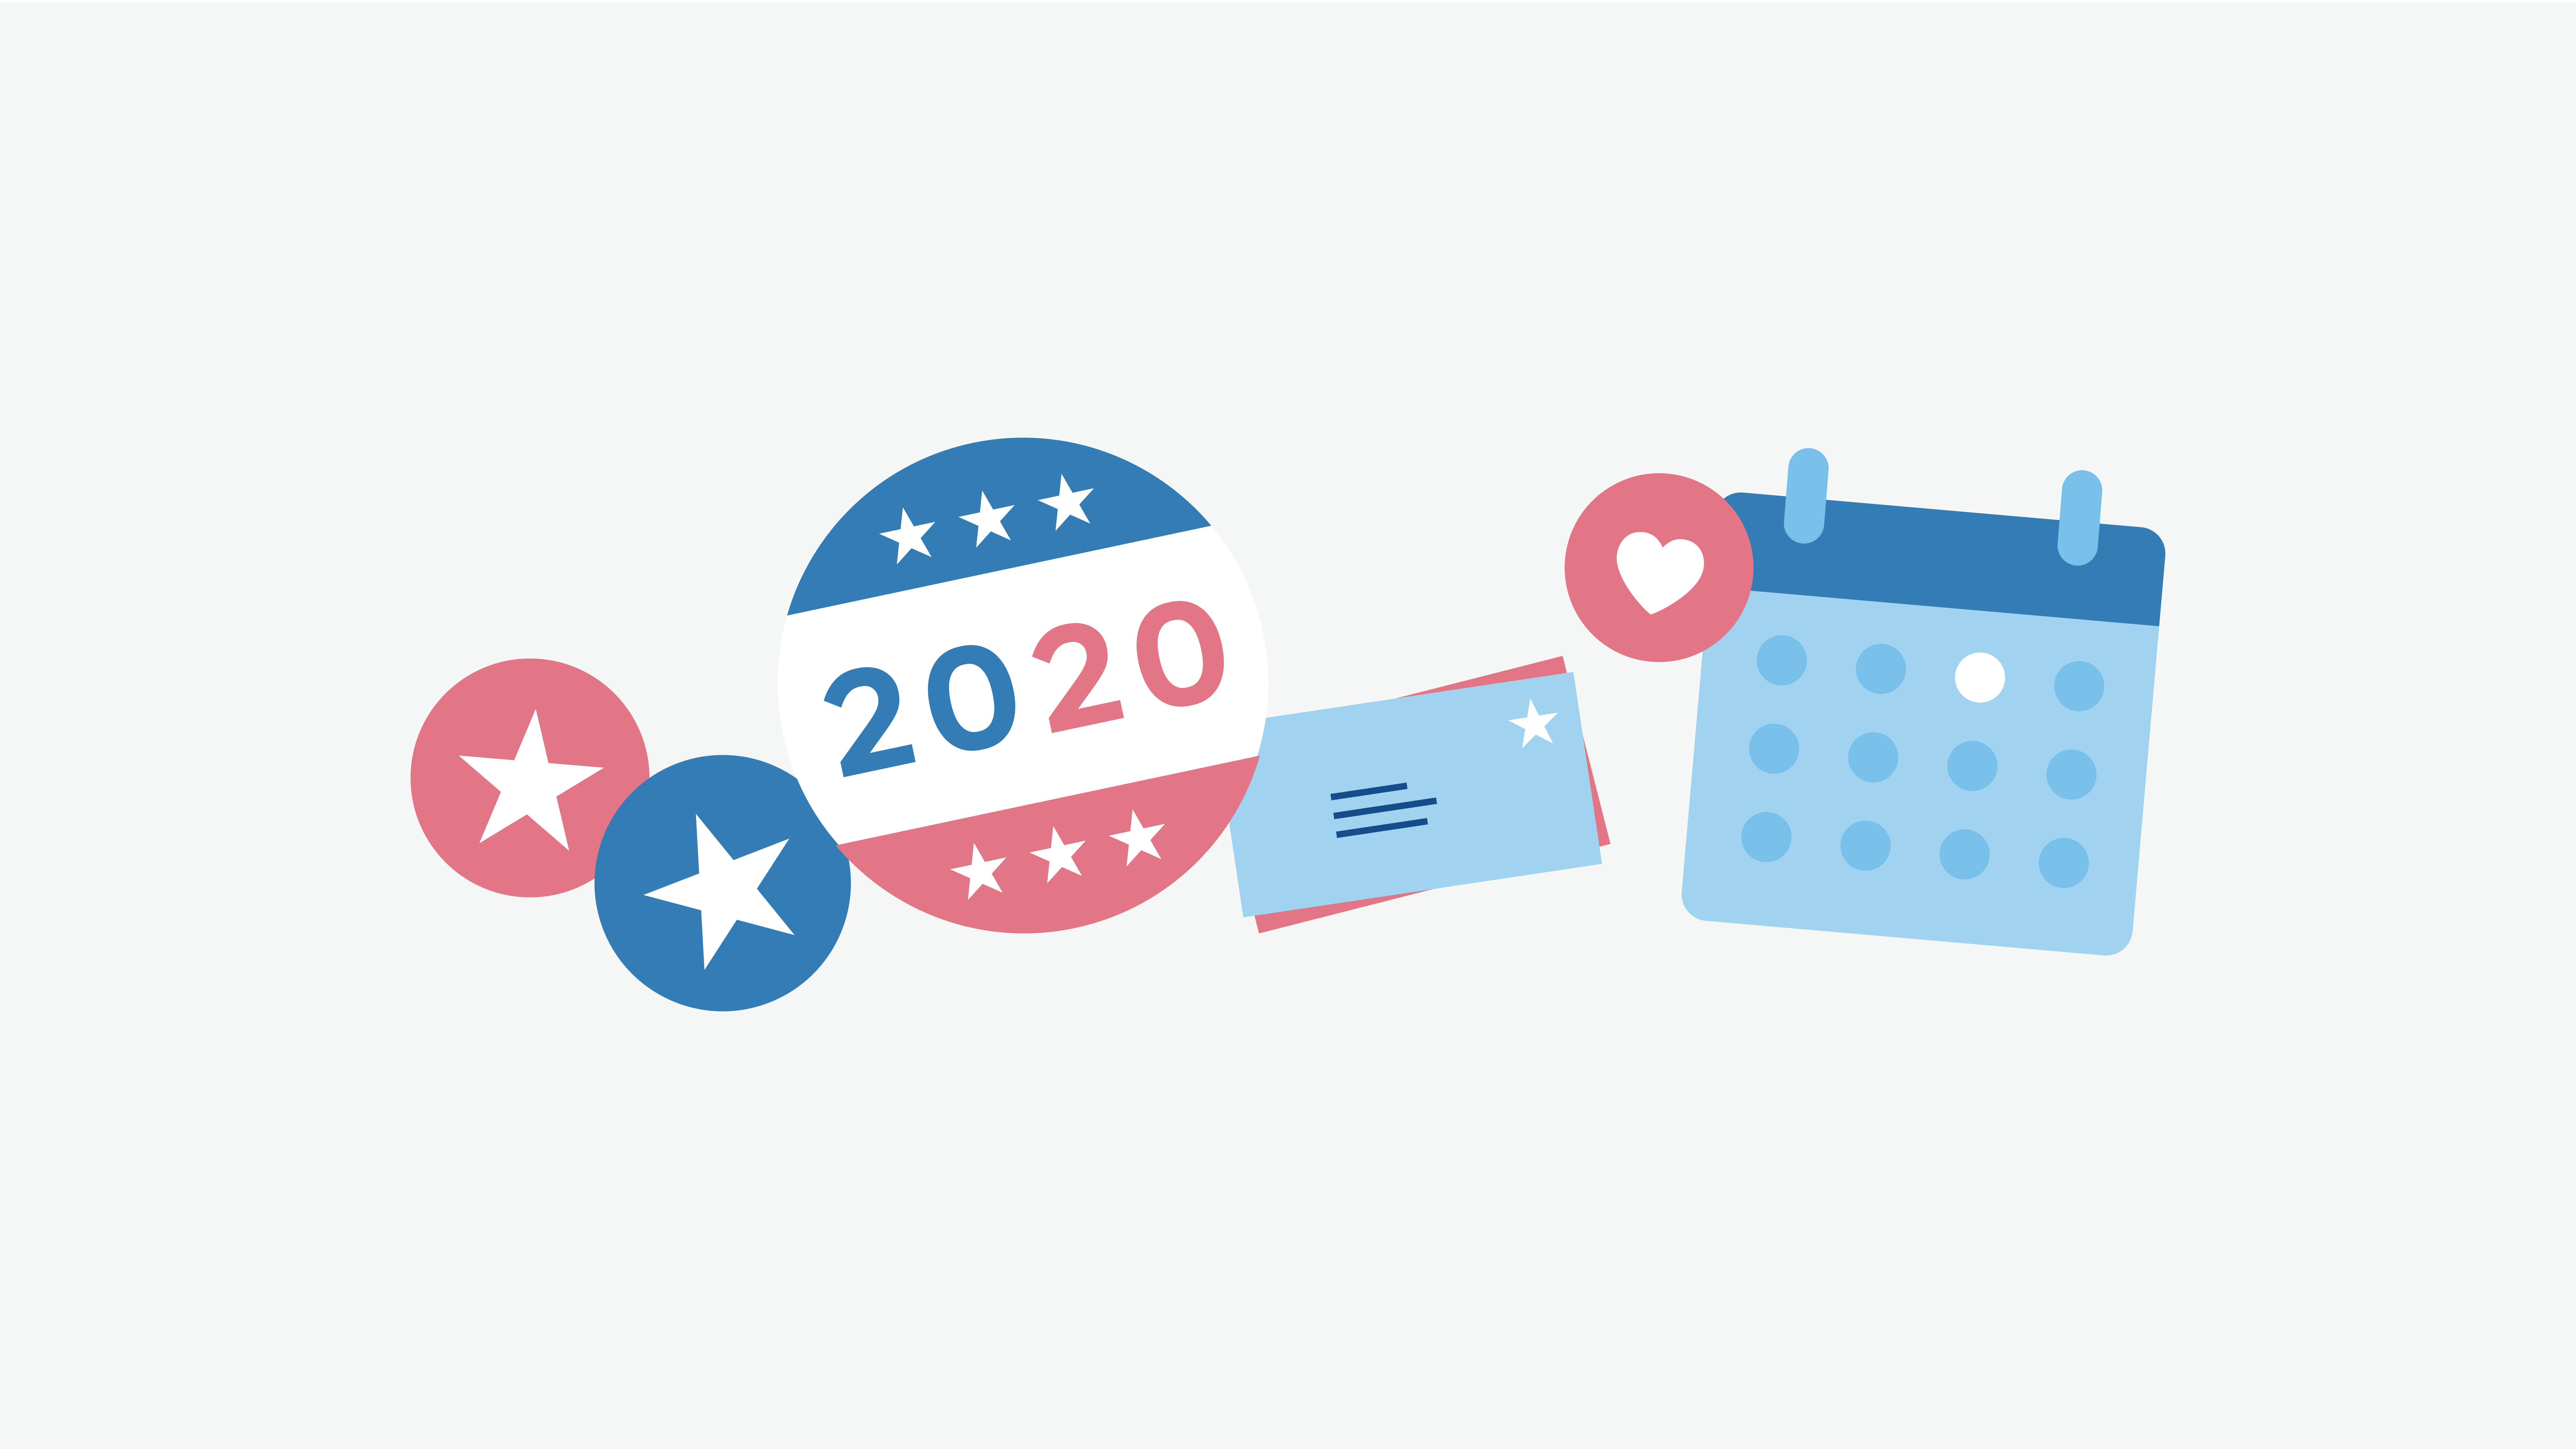 Elections graphic